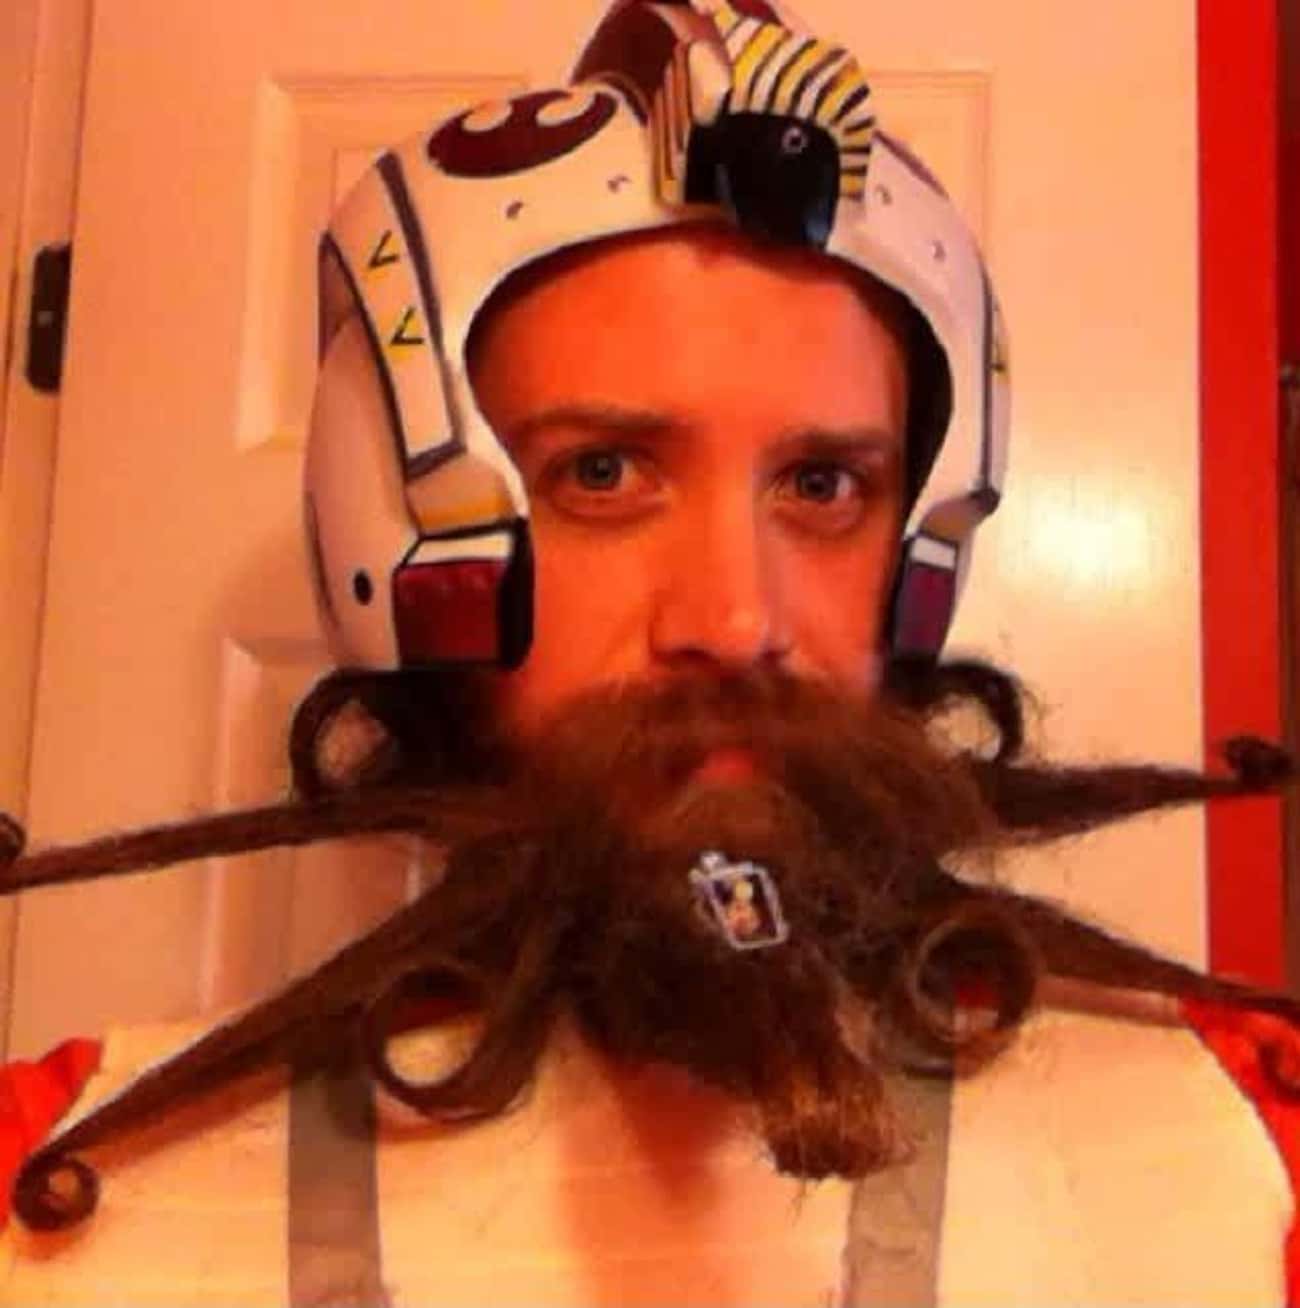 X-Wing Beard Gives You Wings